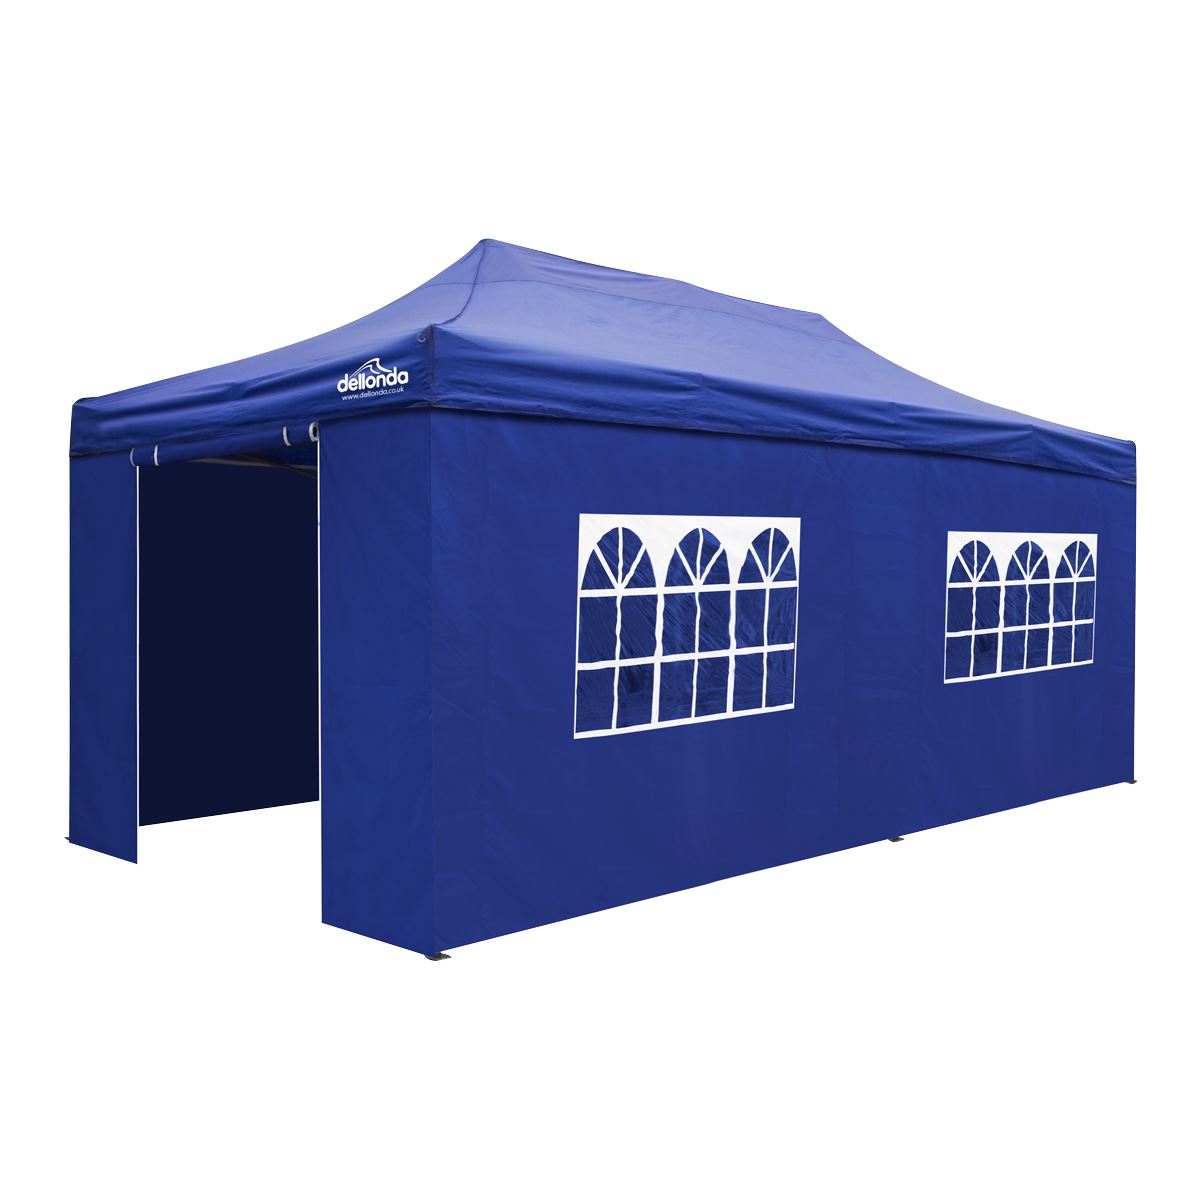 Dellonda Premium 3x6m Pop-Up Gazebo & Side Walls, PVC Coated, Water Resistant Fabric with Carry Bag, Rope, Stakes & Weight Bags - Blue Canopy - DG173